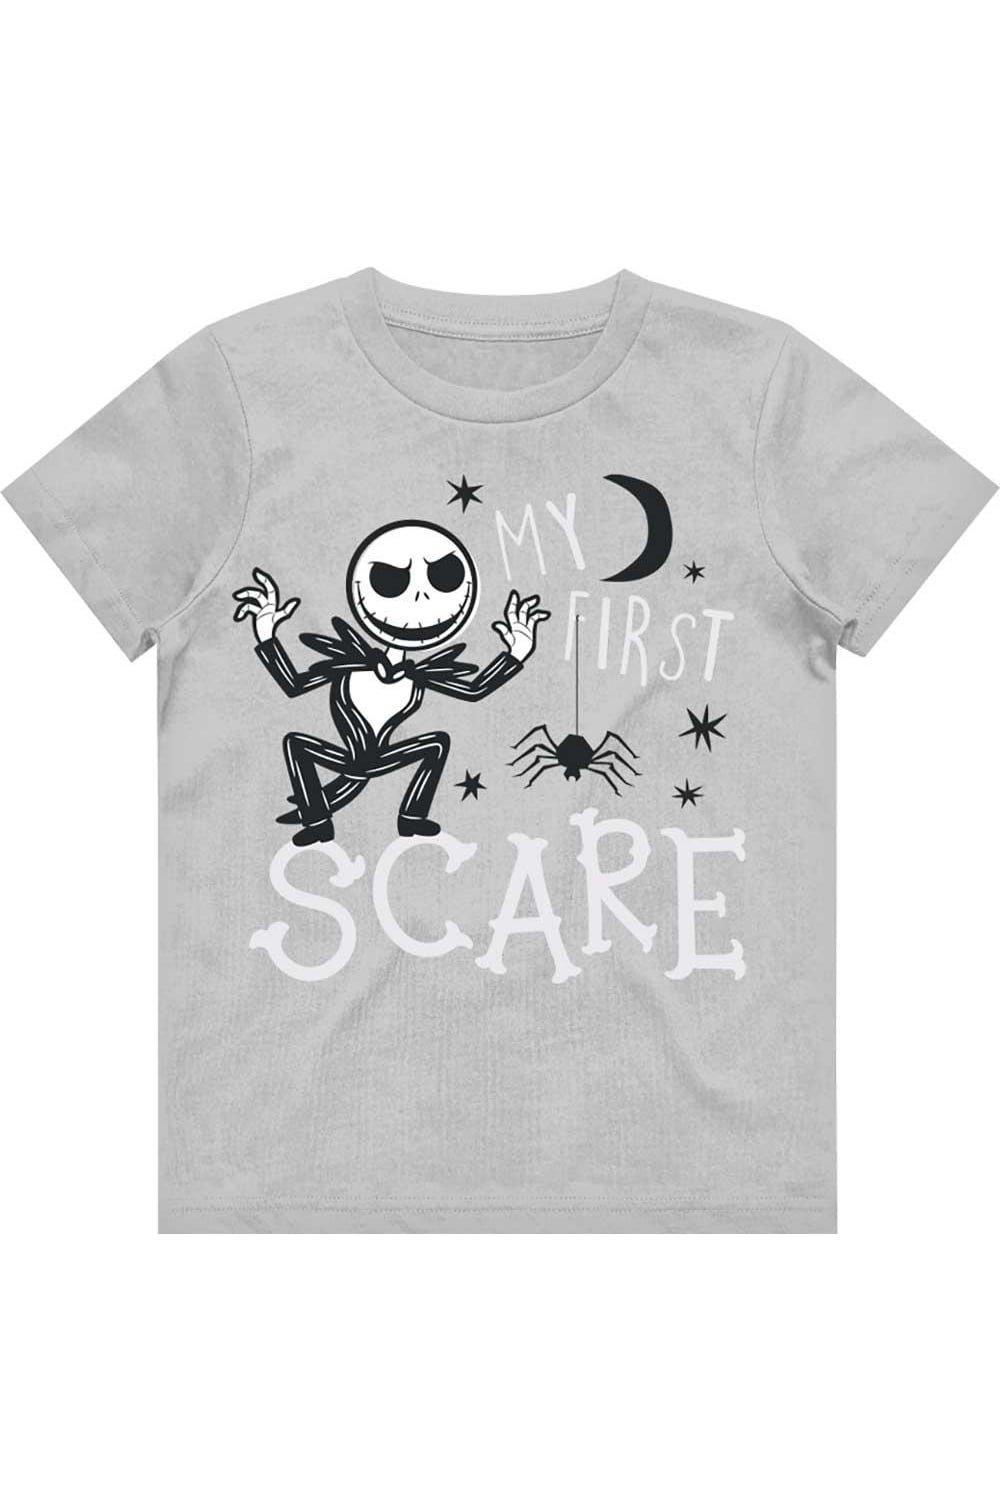 First Scare Cotton T-Shirt